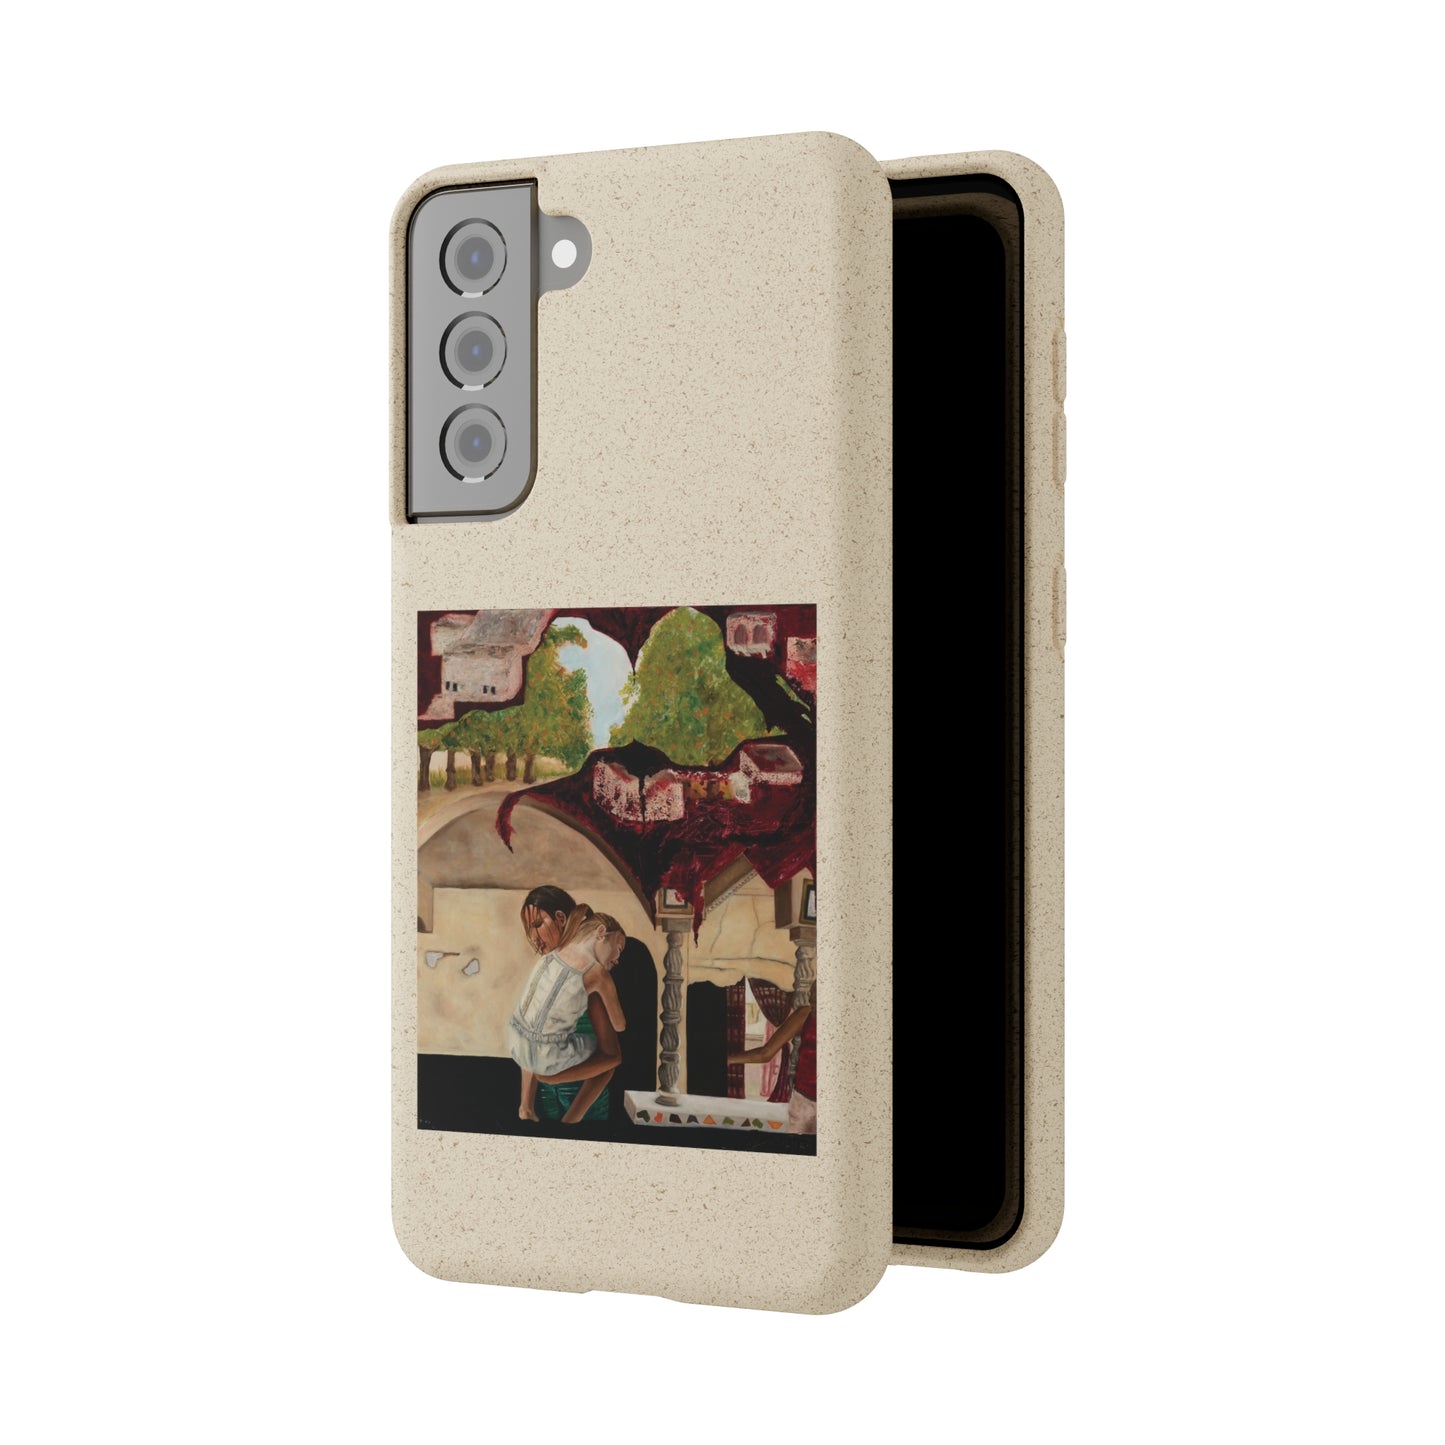 Biodegradable Phone Case Printed with "Psyche of Lost Youth" - art under moonlight